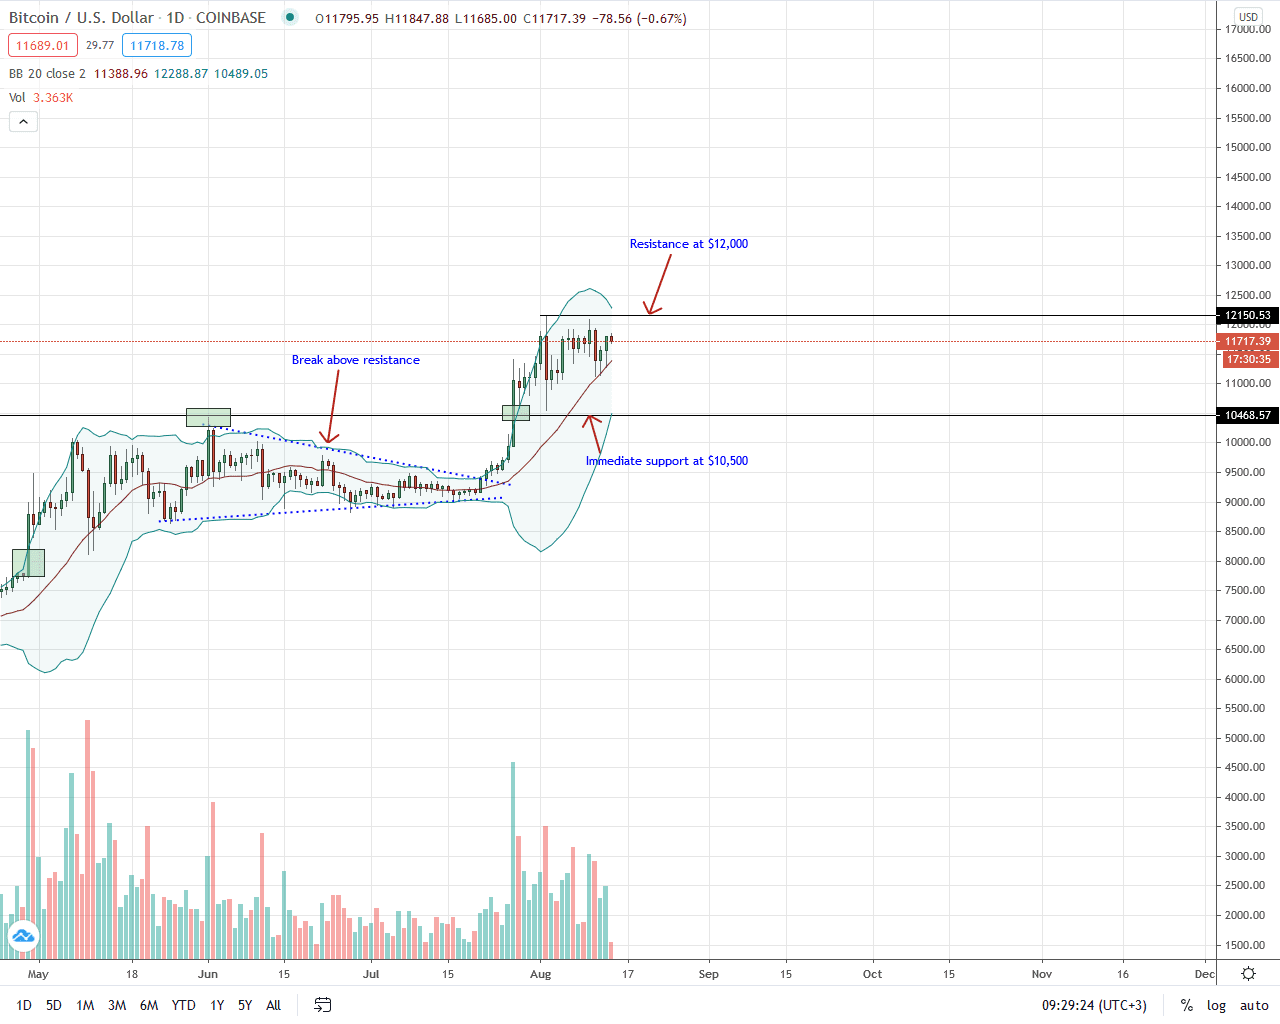 Bitcoin Daily Chart for Aug 14